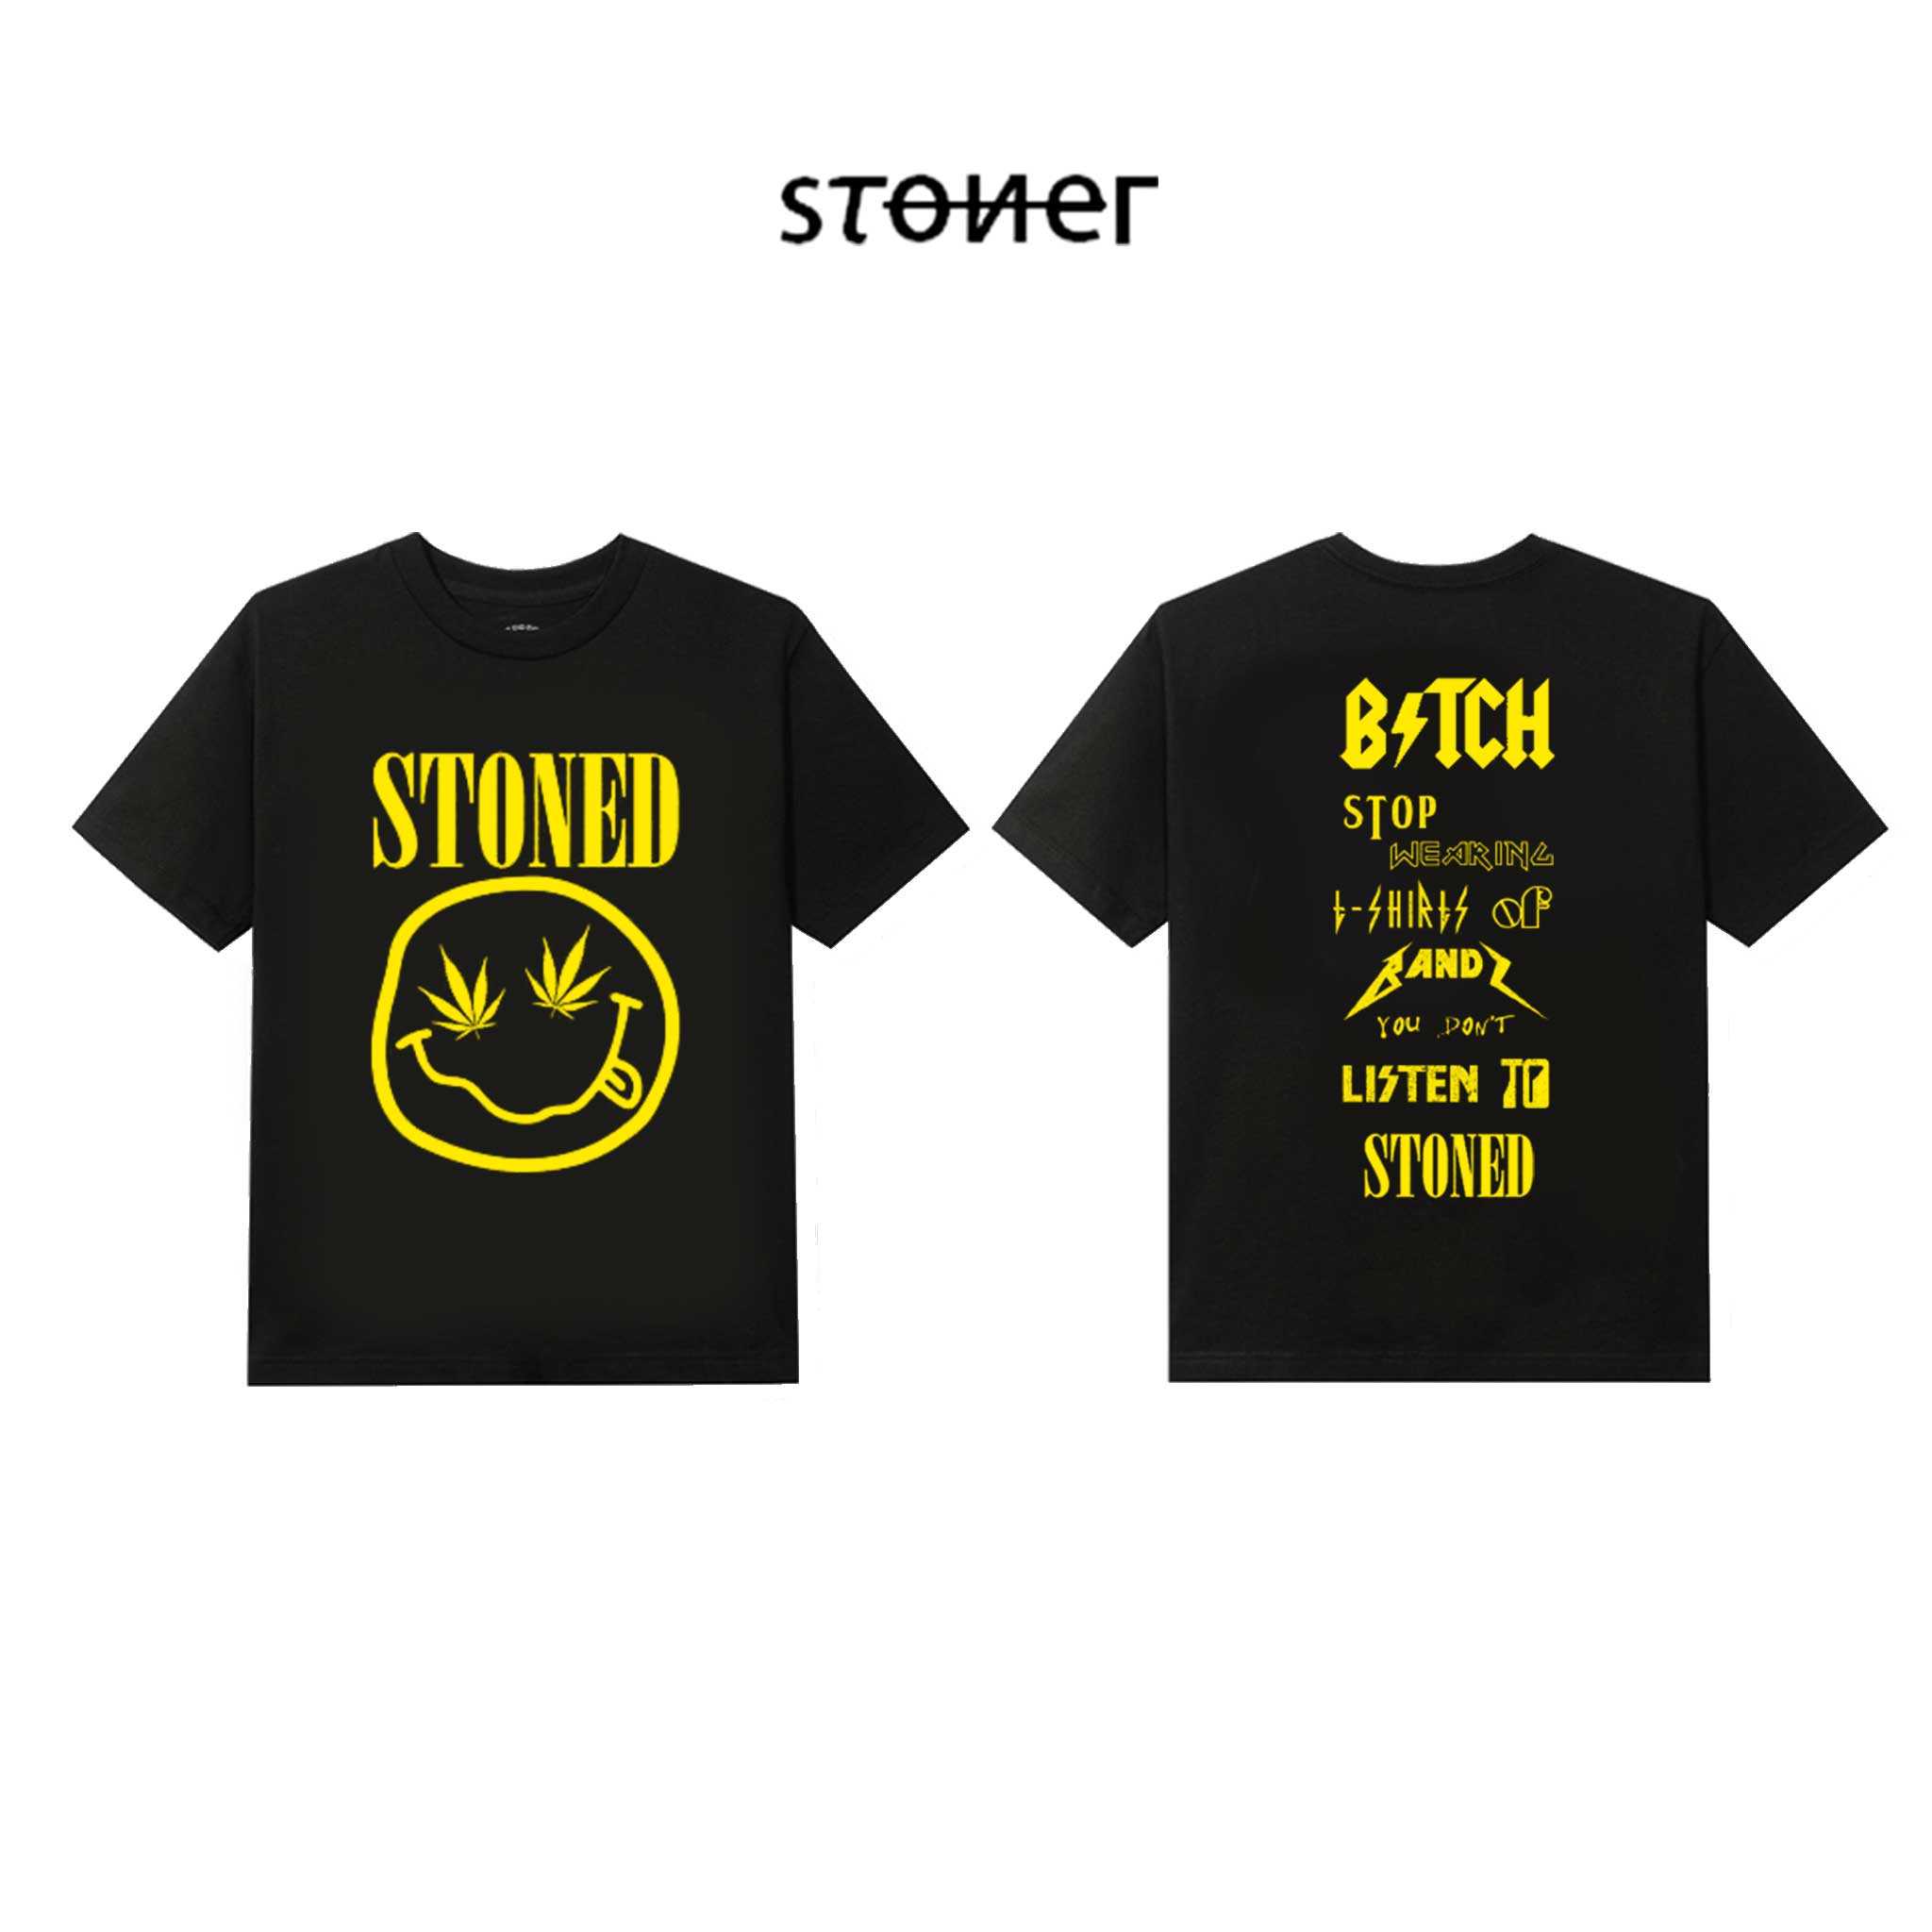 ⚡ Stoner x Smell teen like spirit (Limited edition)⚡